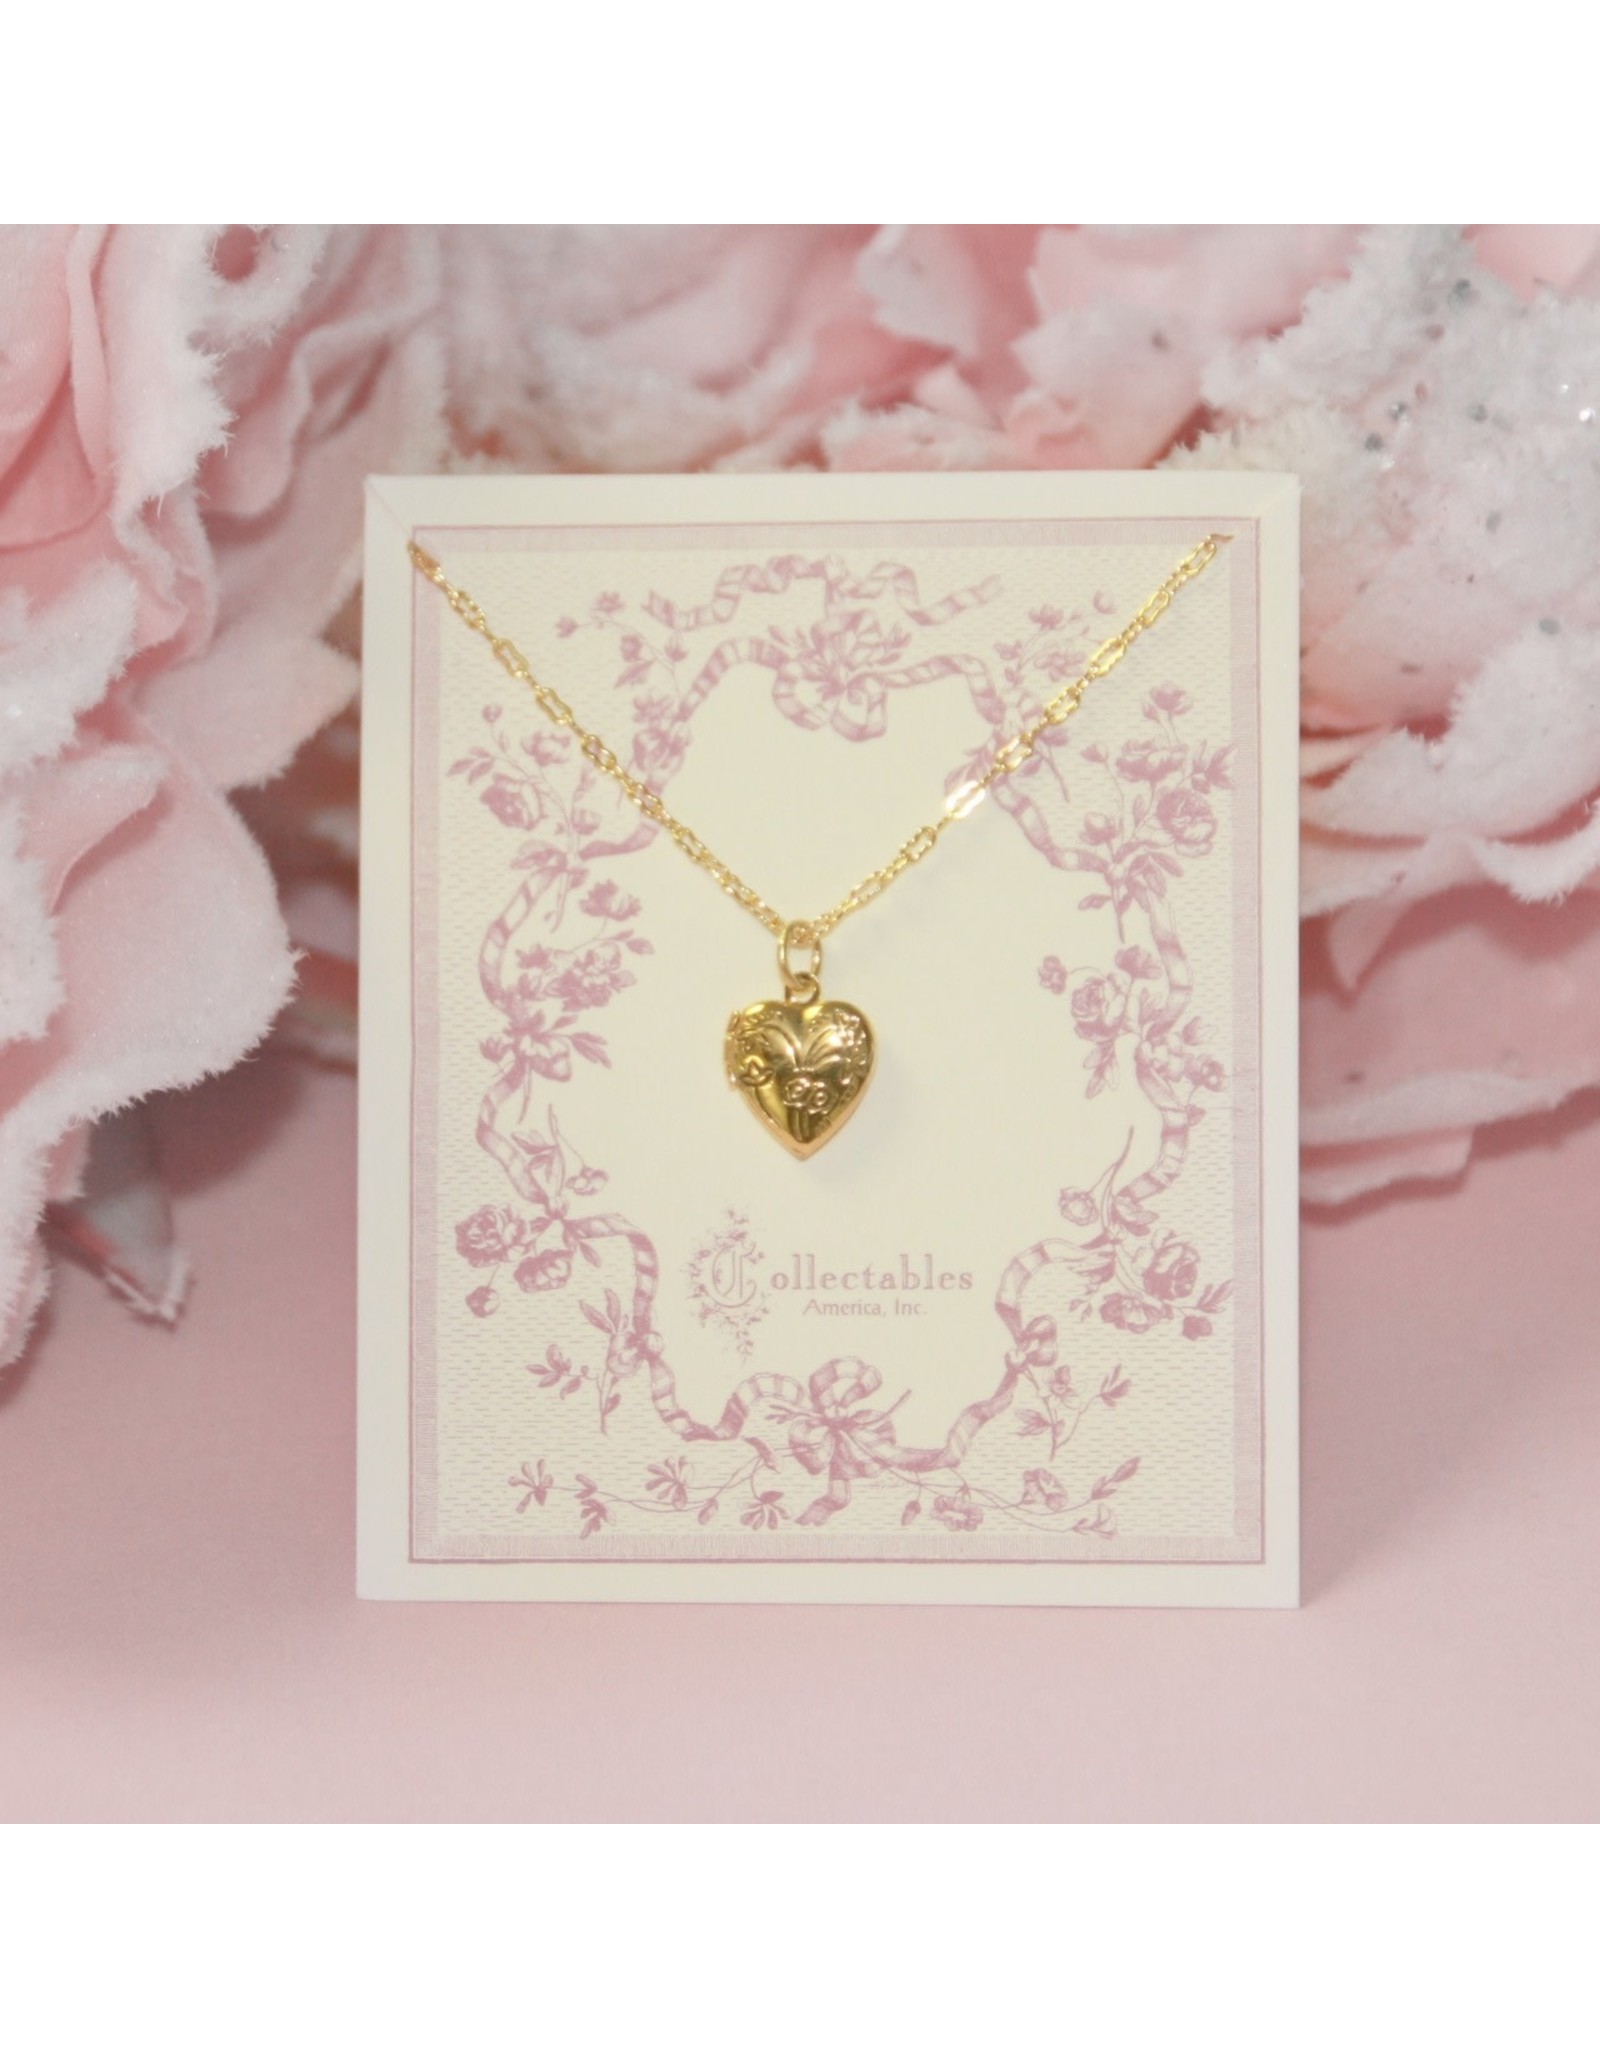 Collectables America the Studio Locket - Heart Necklace